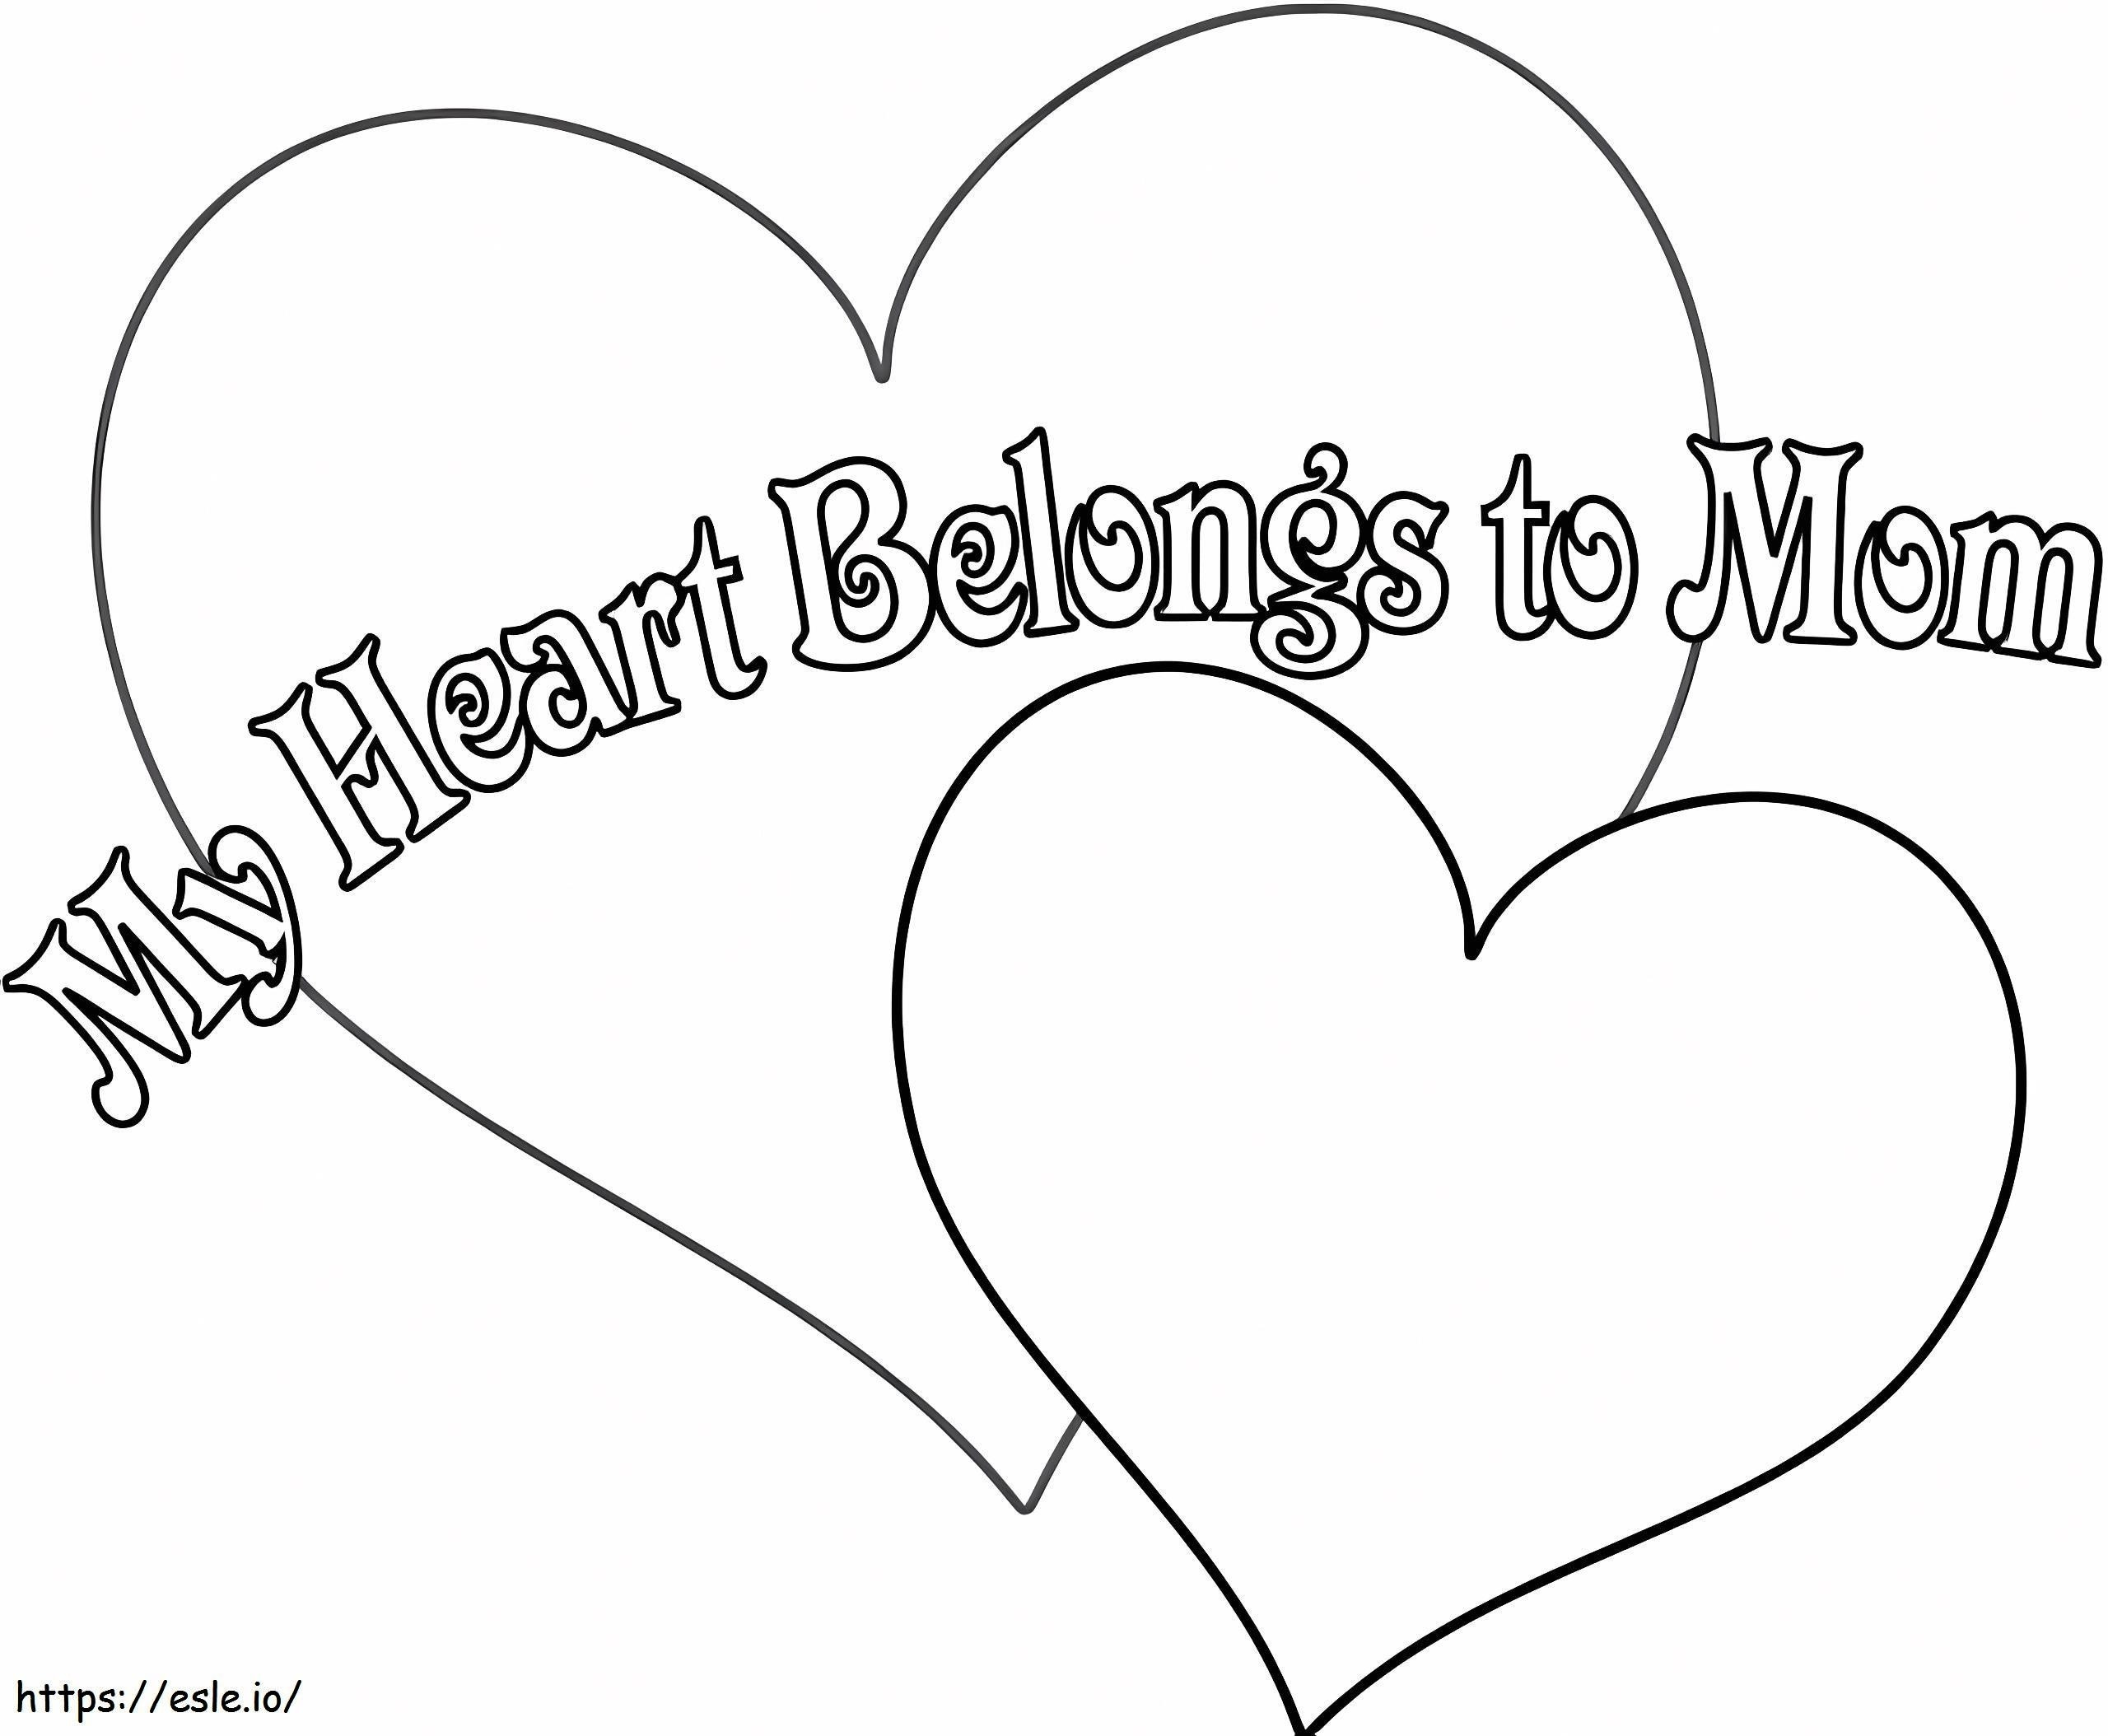 Hearts For Mom coloring page